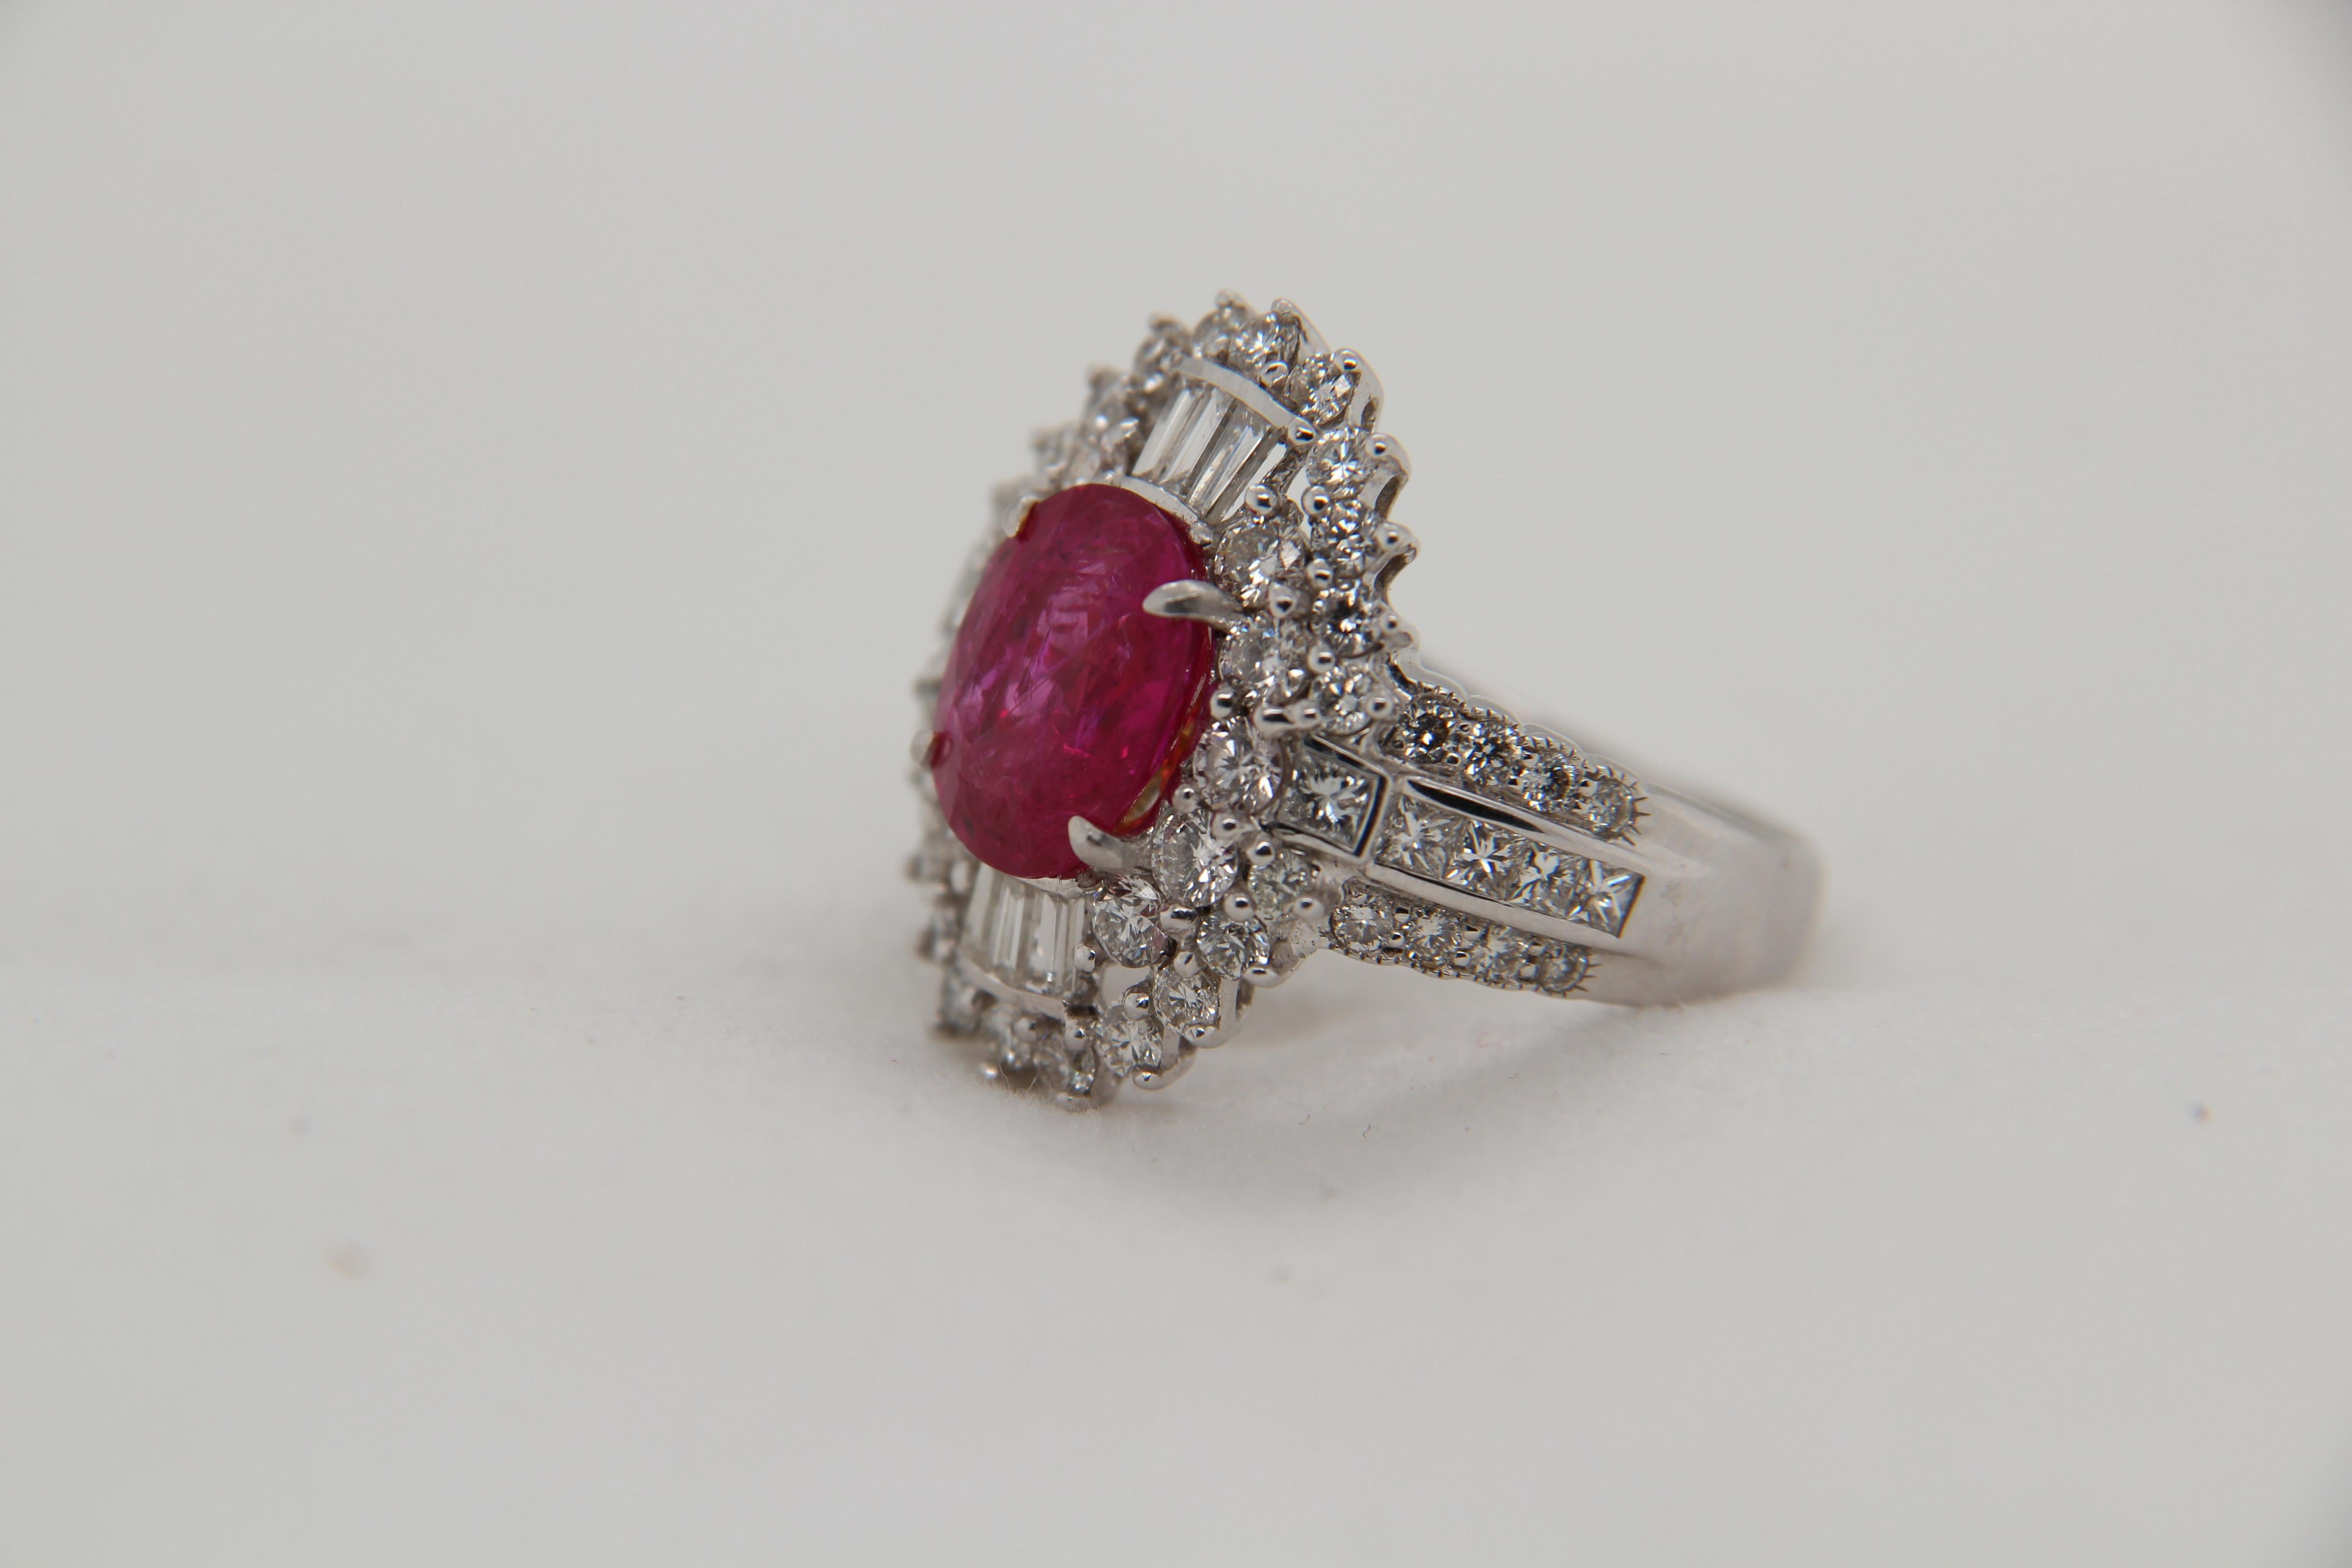 A brand new 2.58 carat ruby and diamond ring in 18 karat gold. The ruby weigh 2.58 carat and diamond weigh 1.61 carat. The total ring weight is 7.14 grams. The ring size US = 6.25 and EU = 53.